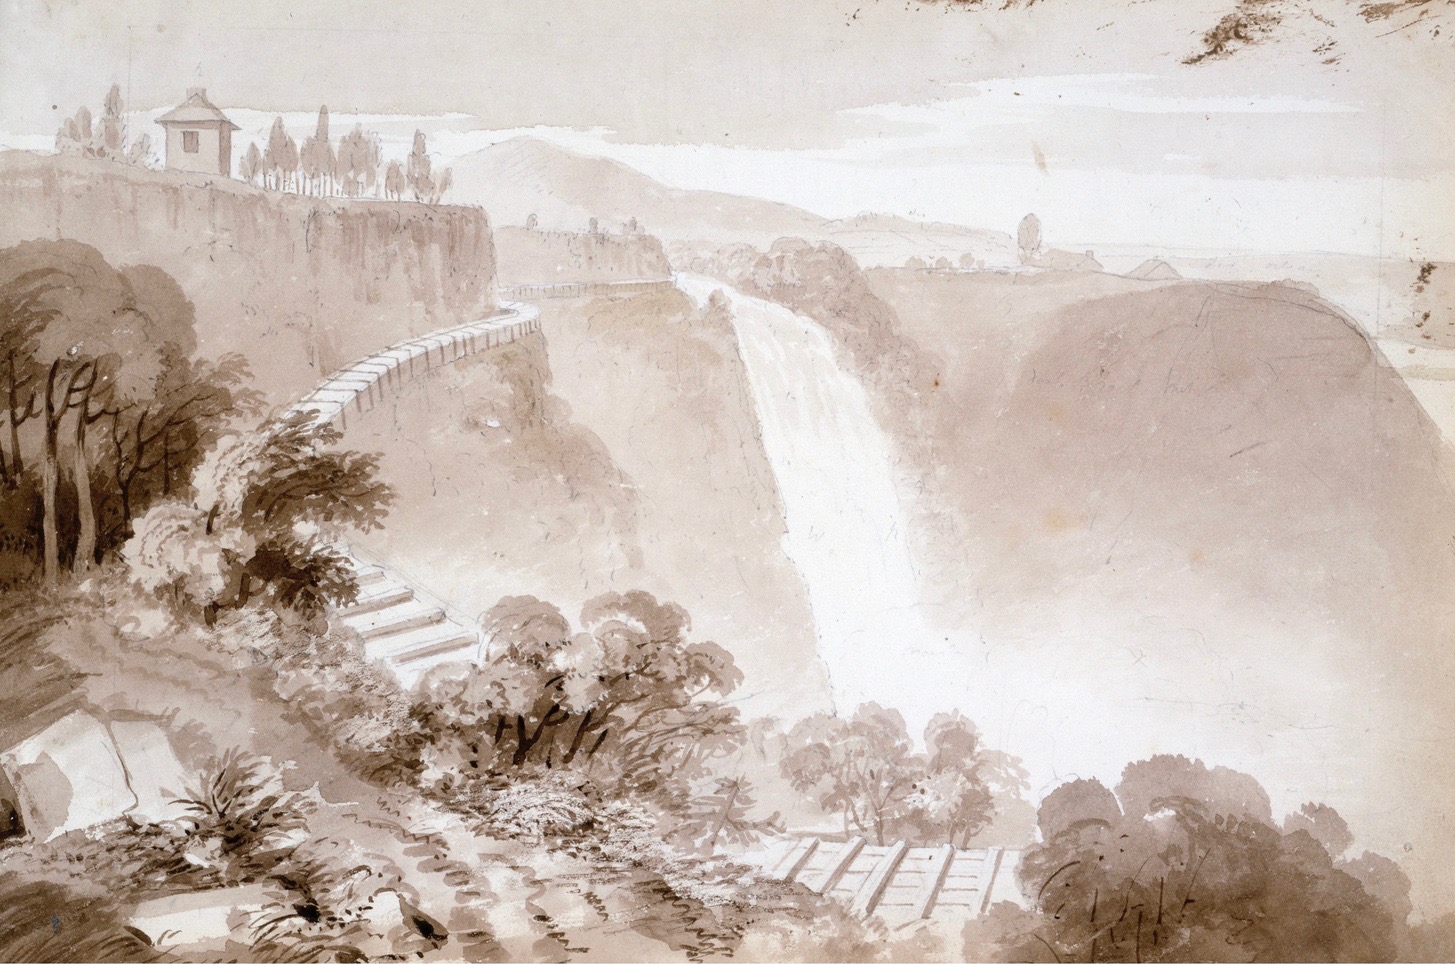 Reproduction of a brown wash-over-pencil drawing depicting the top of the Montmorency Falls in the background, as well as the cliff and the natural surroundings. A wooden penstock carrying water runs along the edge of the cliff.